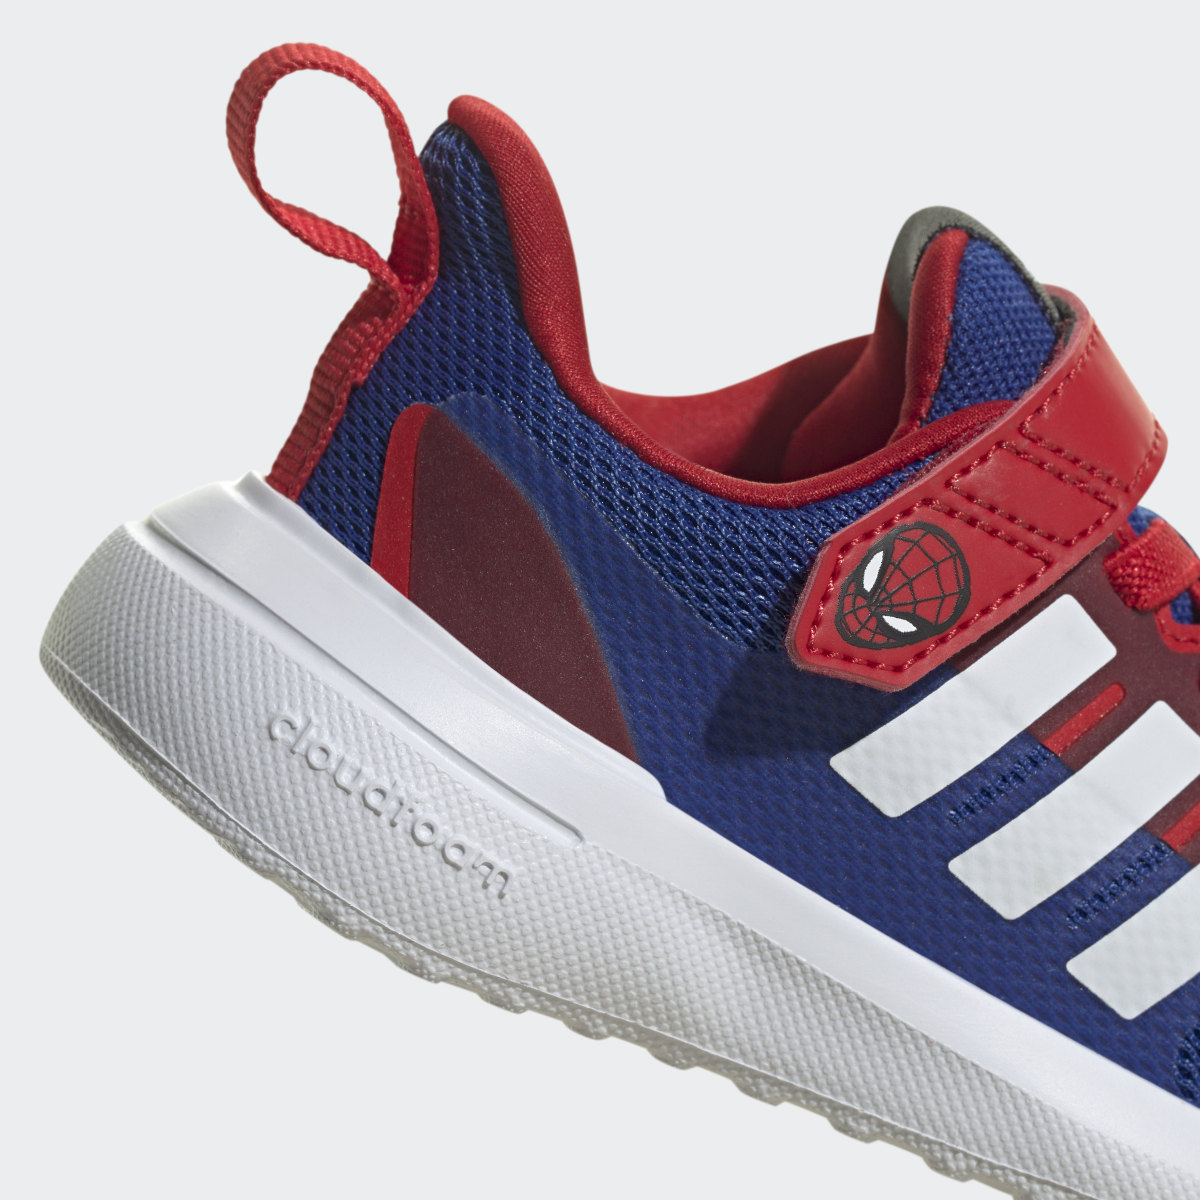 Adidas x Marvel FortaRun 2.0 Spider-Man Cloudfoam Sport Running Elastic Lace Top Strap Shoes. 9